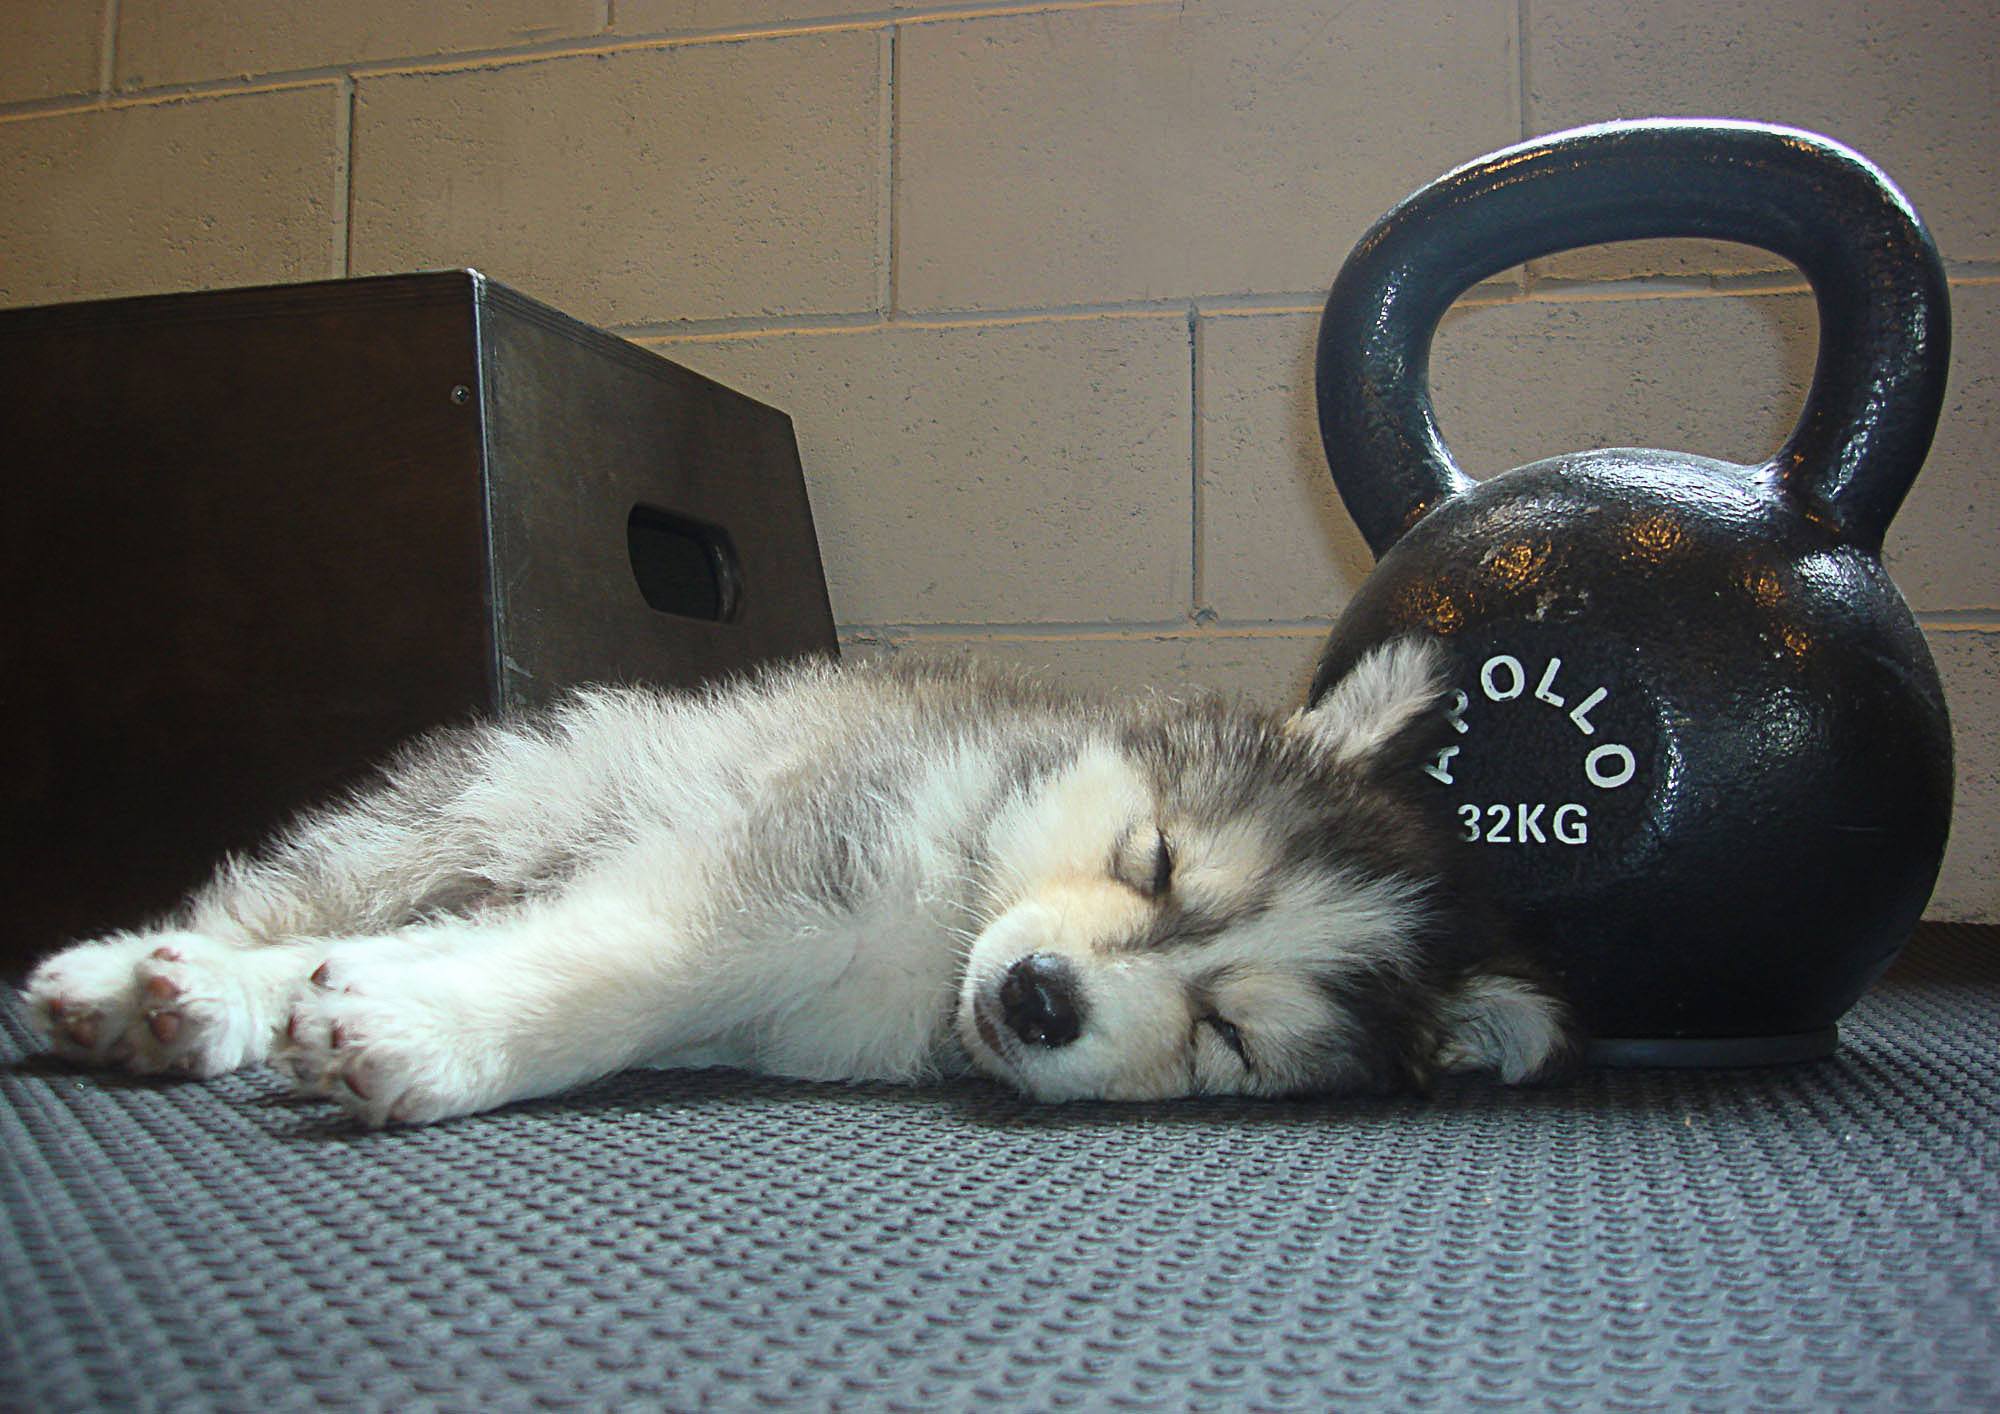 Sleeping in the gym